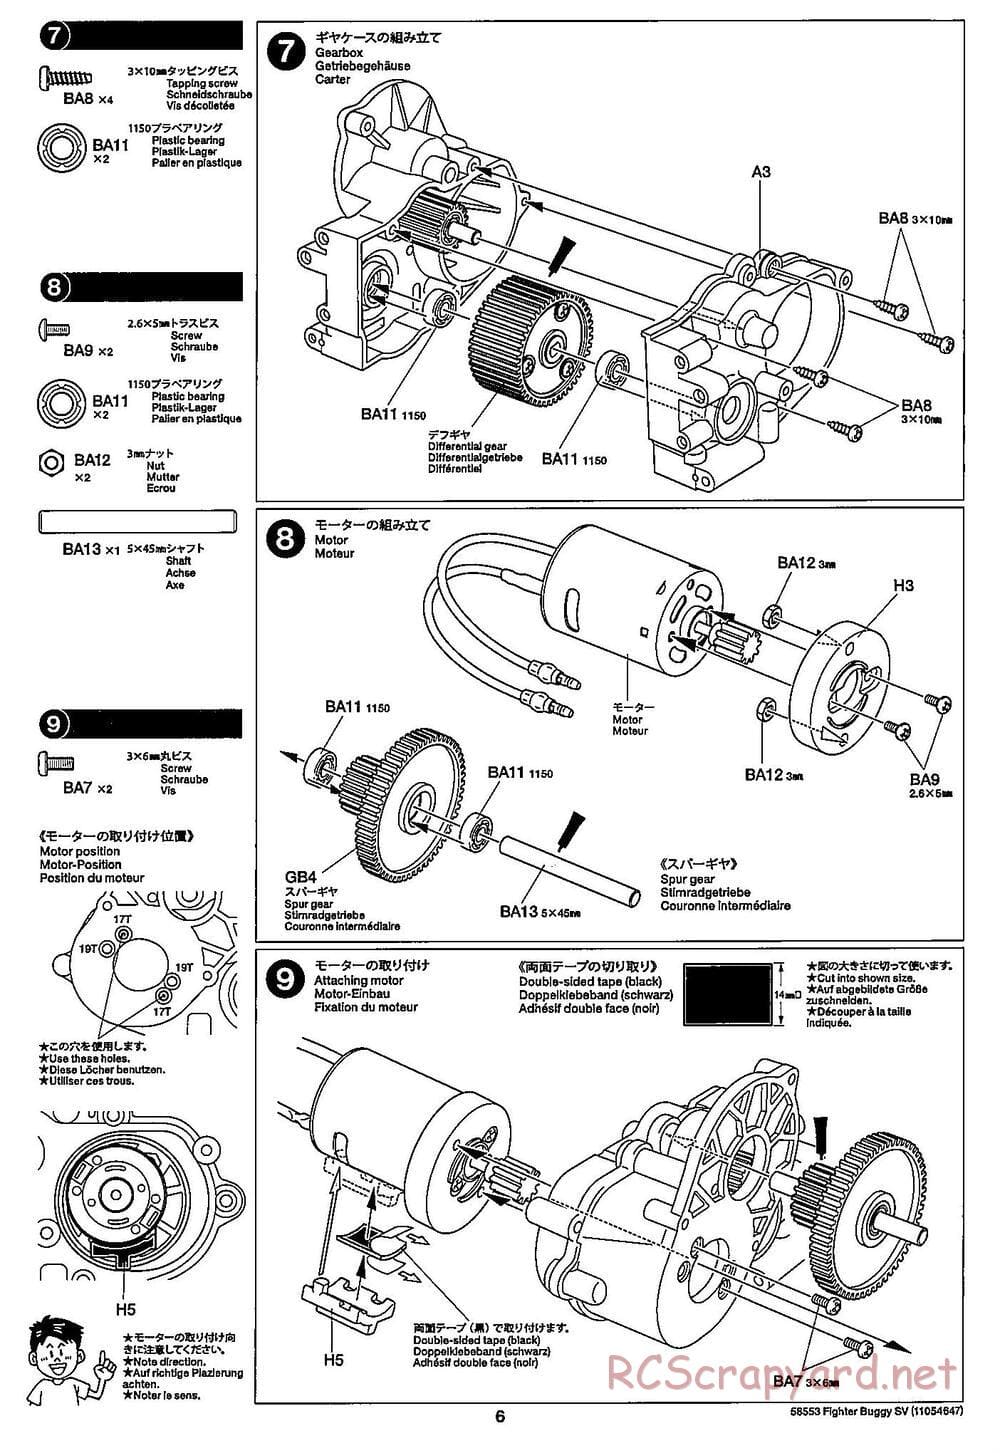 Tamiya - Fighter Buggy SV Chassis - Manual - Page 6